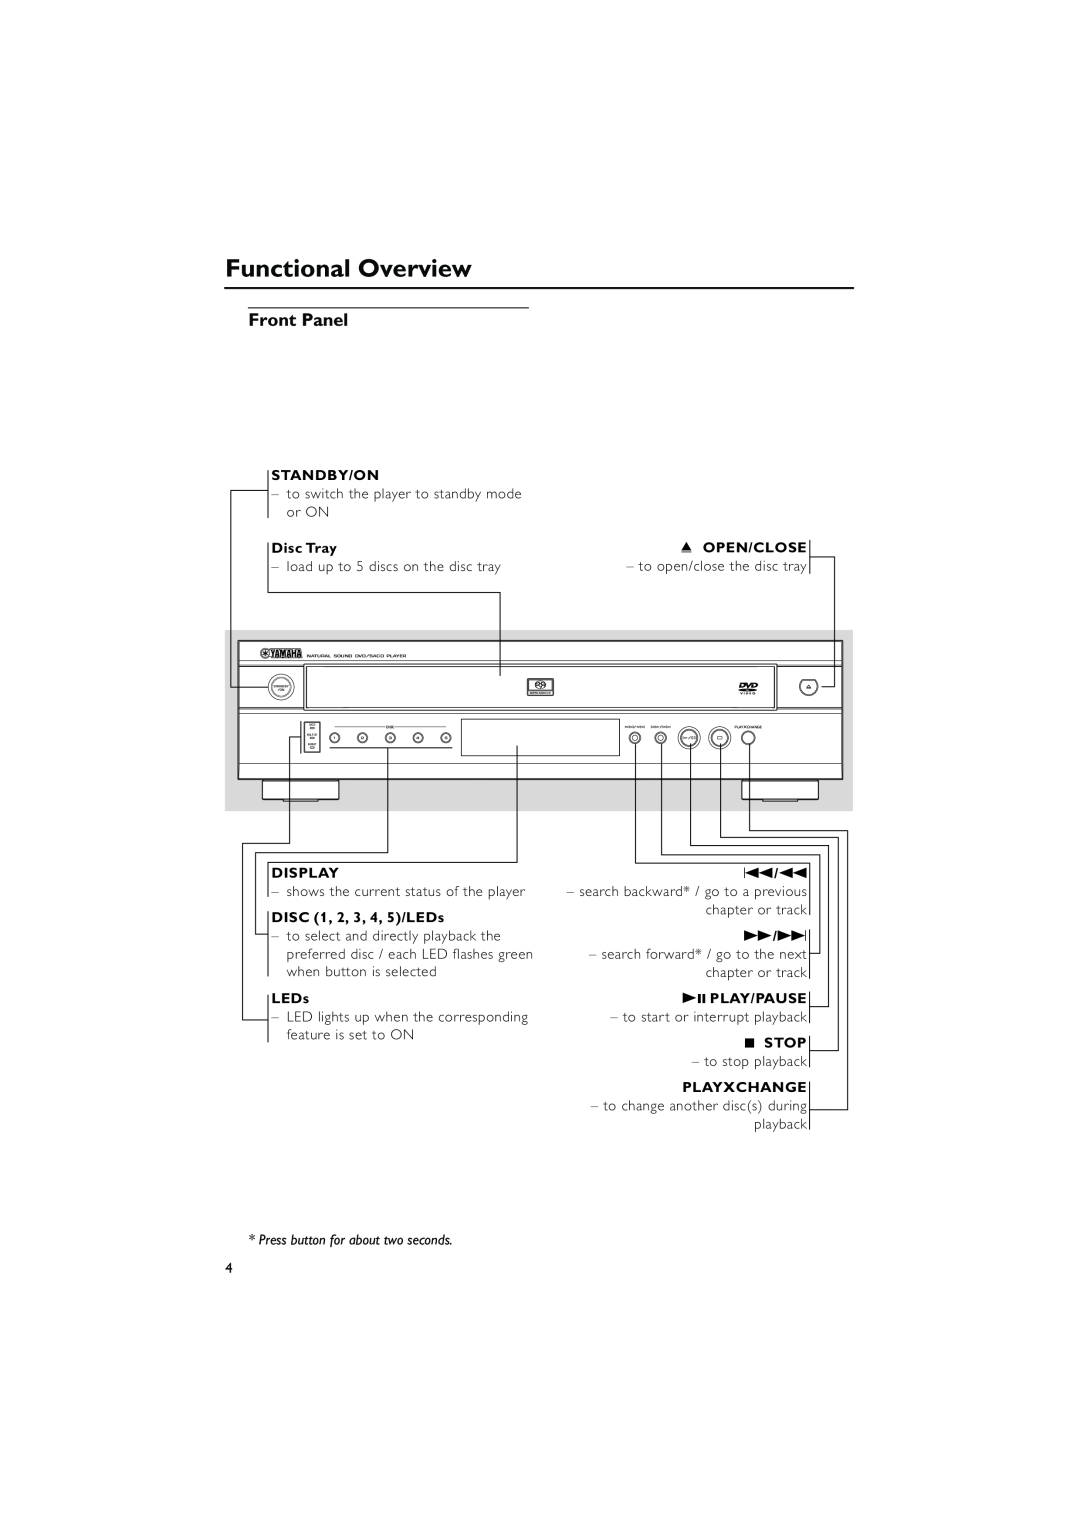 Yamaha DVD-C940 owner manual Functional Overview, Front Panel 